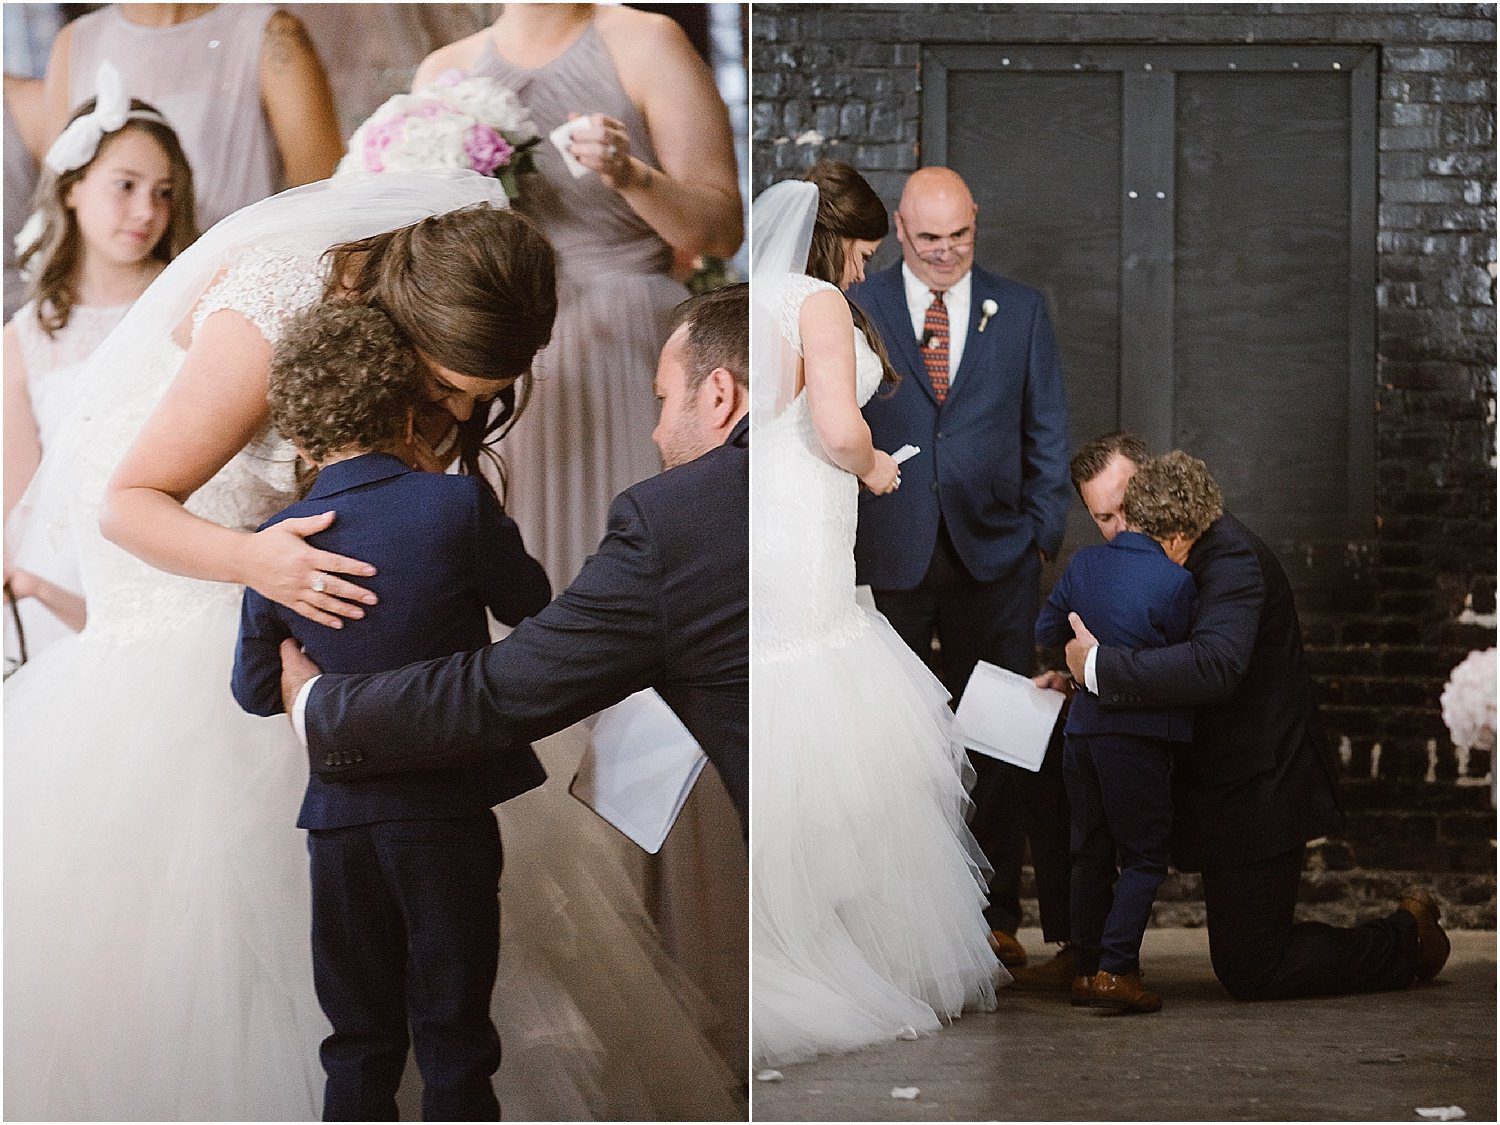 Intimate Wedding moments at Jackson Terminal in Knoxville